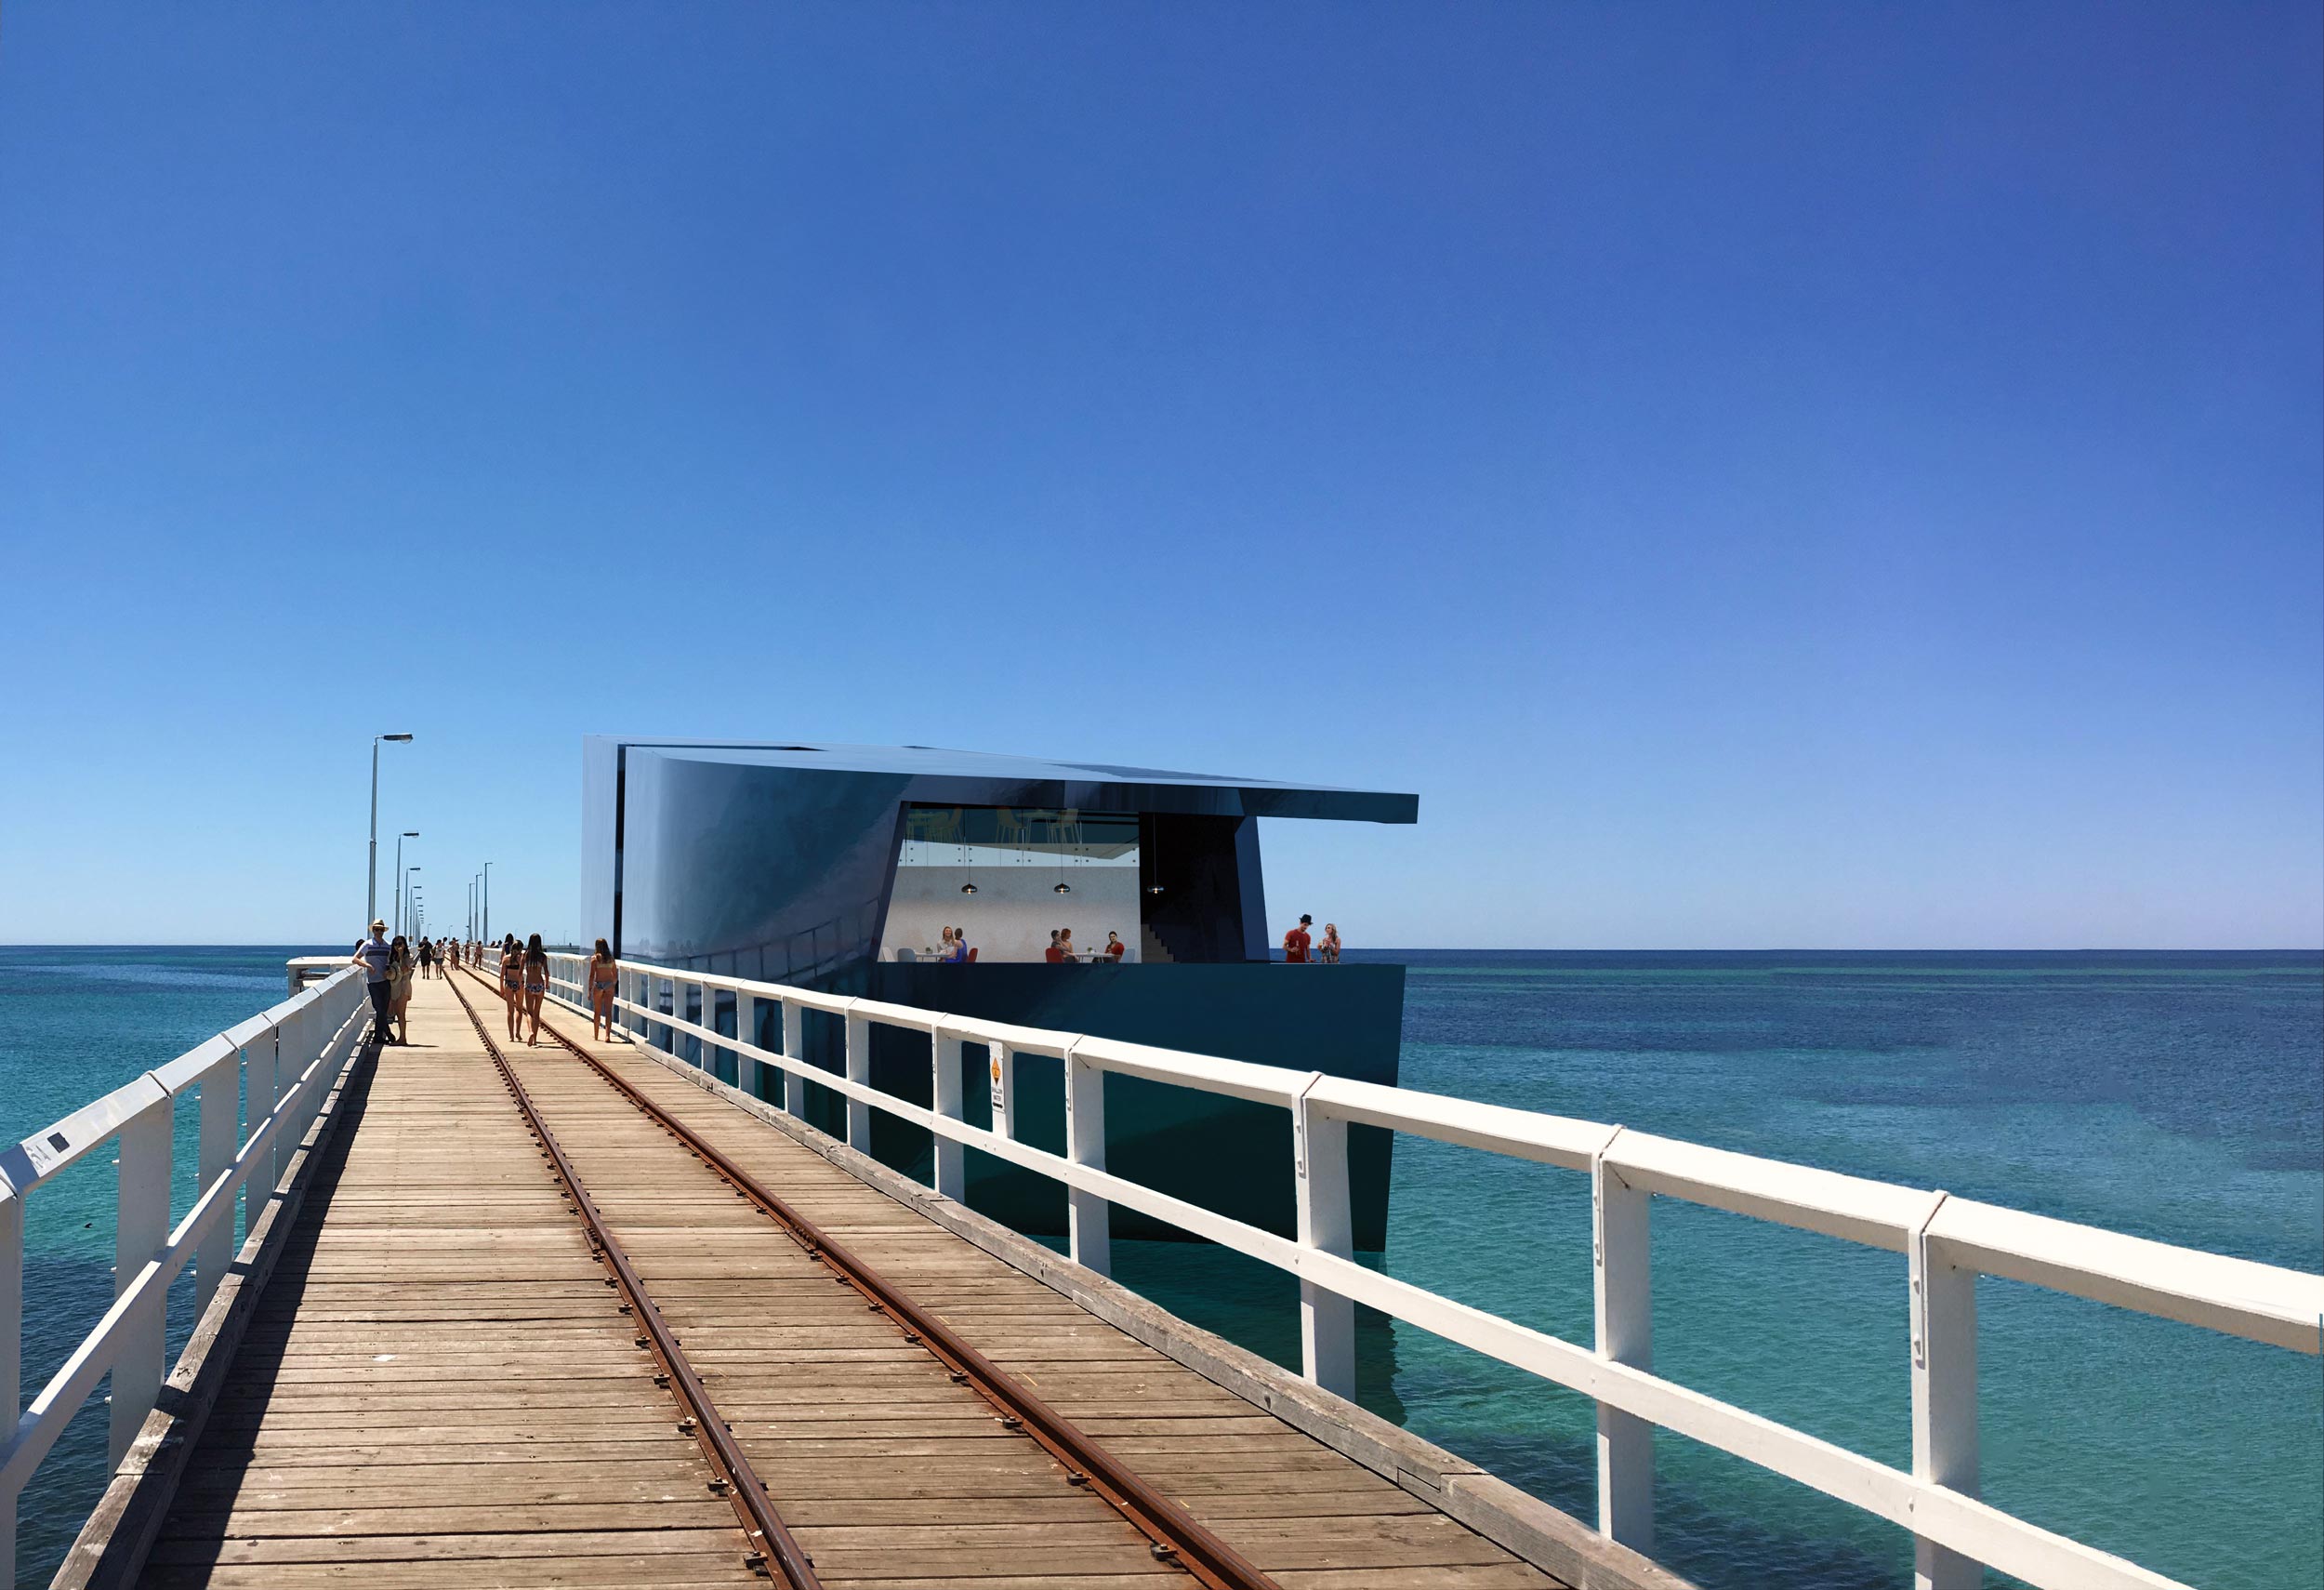 View of the VOYAGE from the Busselton Jetty pier